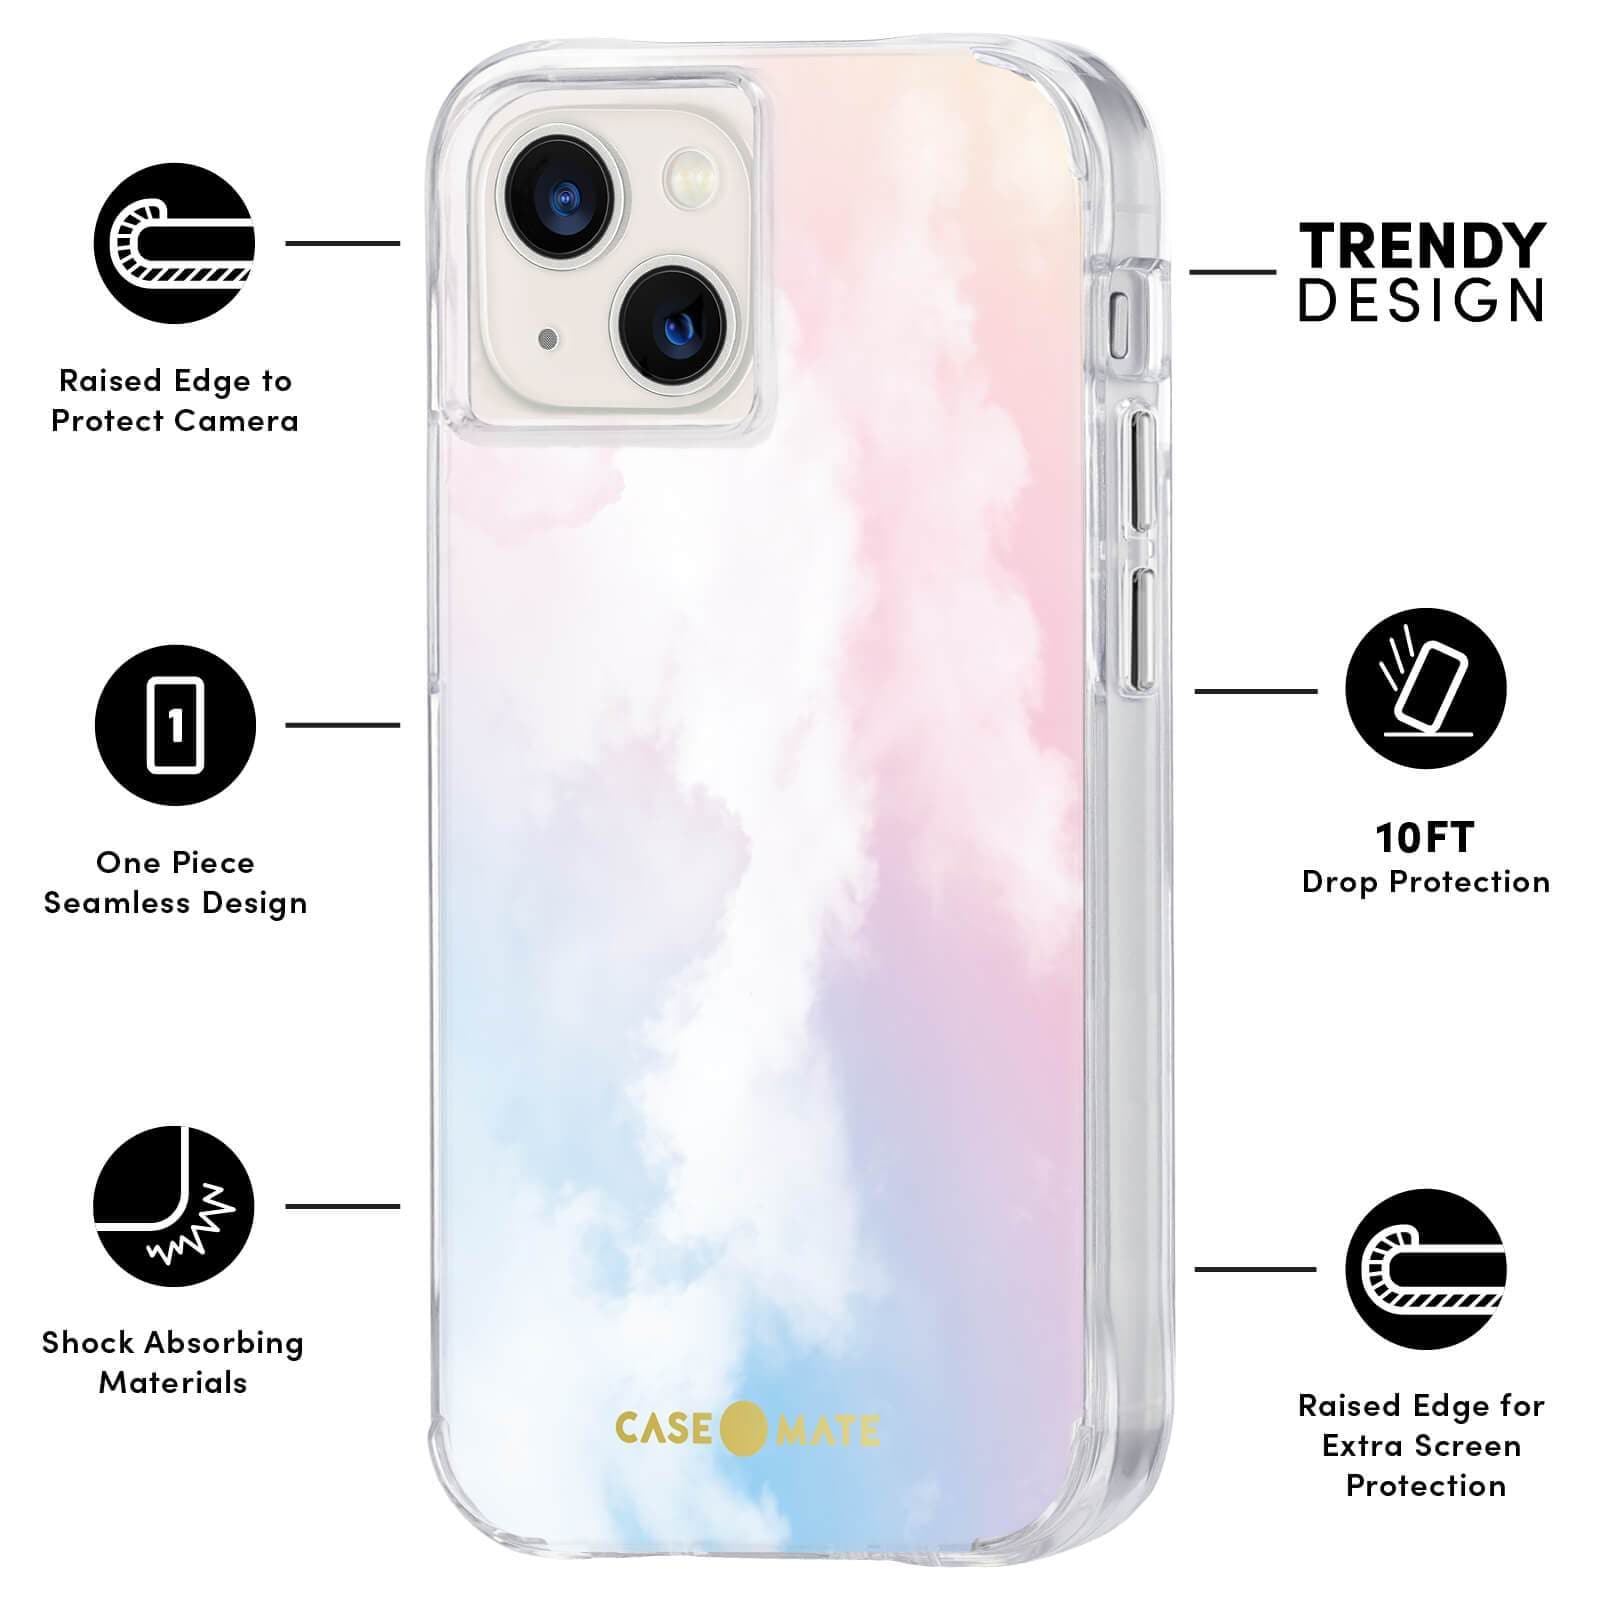 FEATURES: RAISED EDGE TO PROTECT CAMERA, ONE PIECE SEAMLESS DESIGN, SHOCK ABSORBING MATERIALS, TRENDY DESIGN, 10FT DROP PROTECTION, RAISED EDGE FOR EXTRA SCREEN PROTECTION. COLOR::CLOUD 9